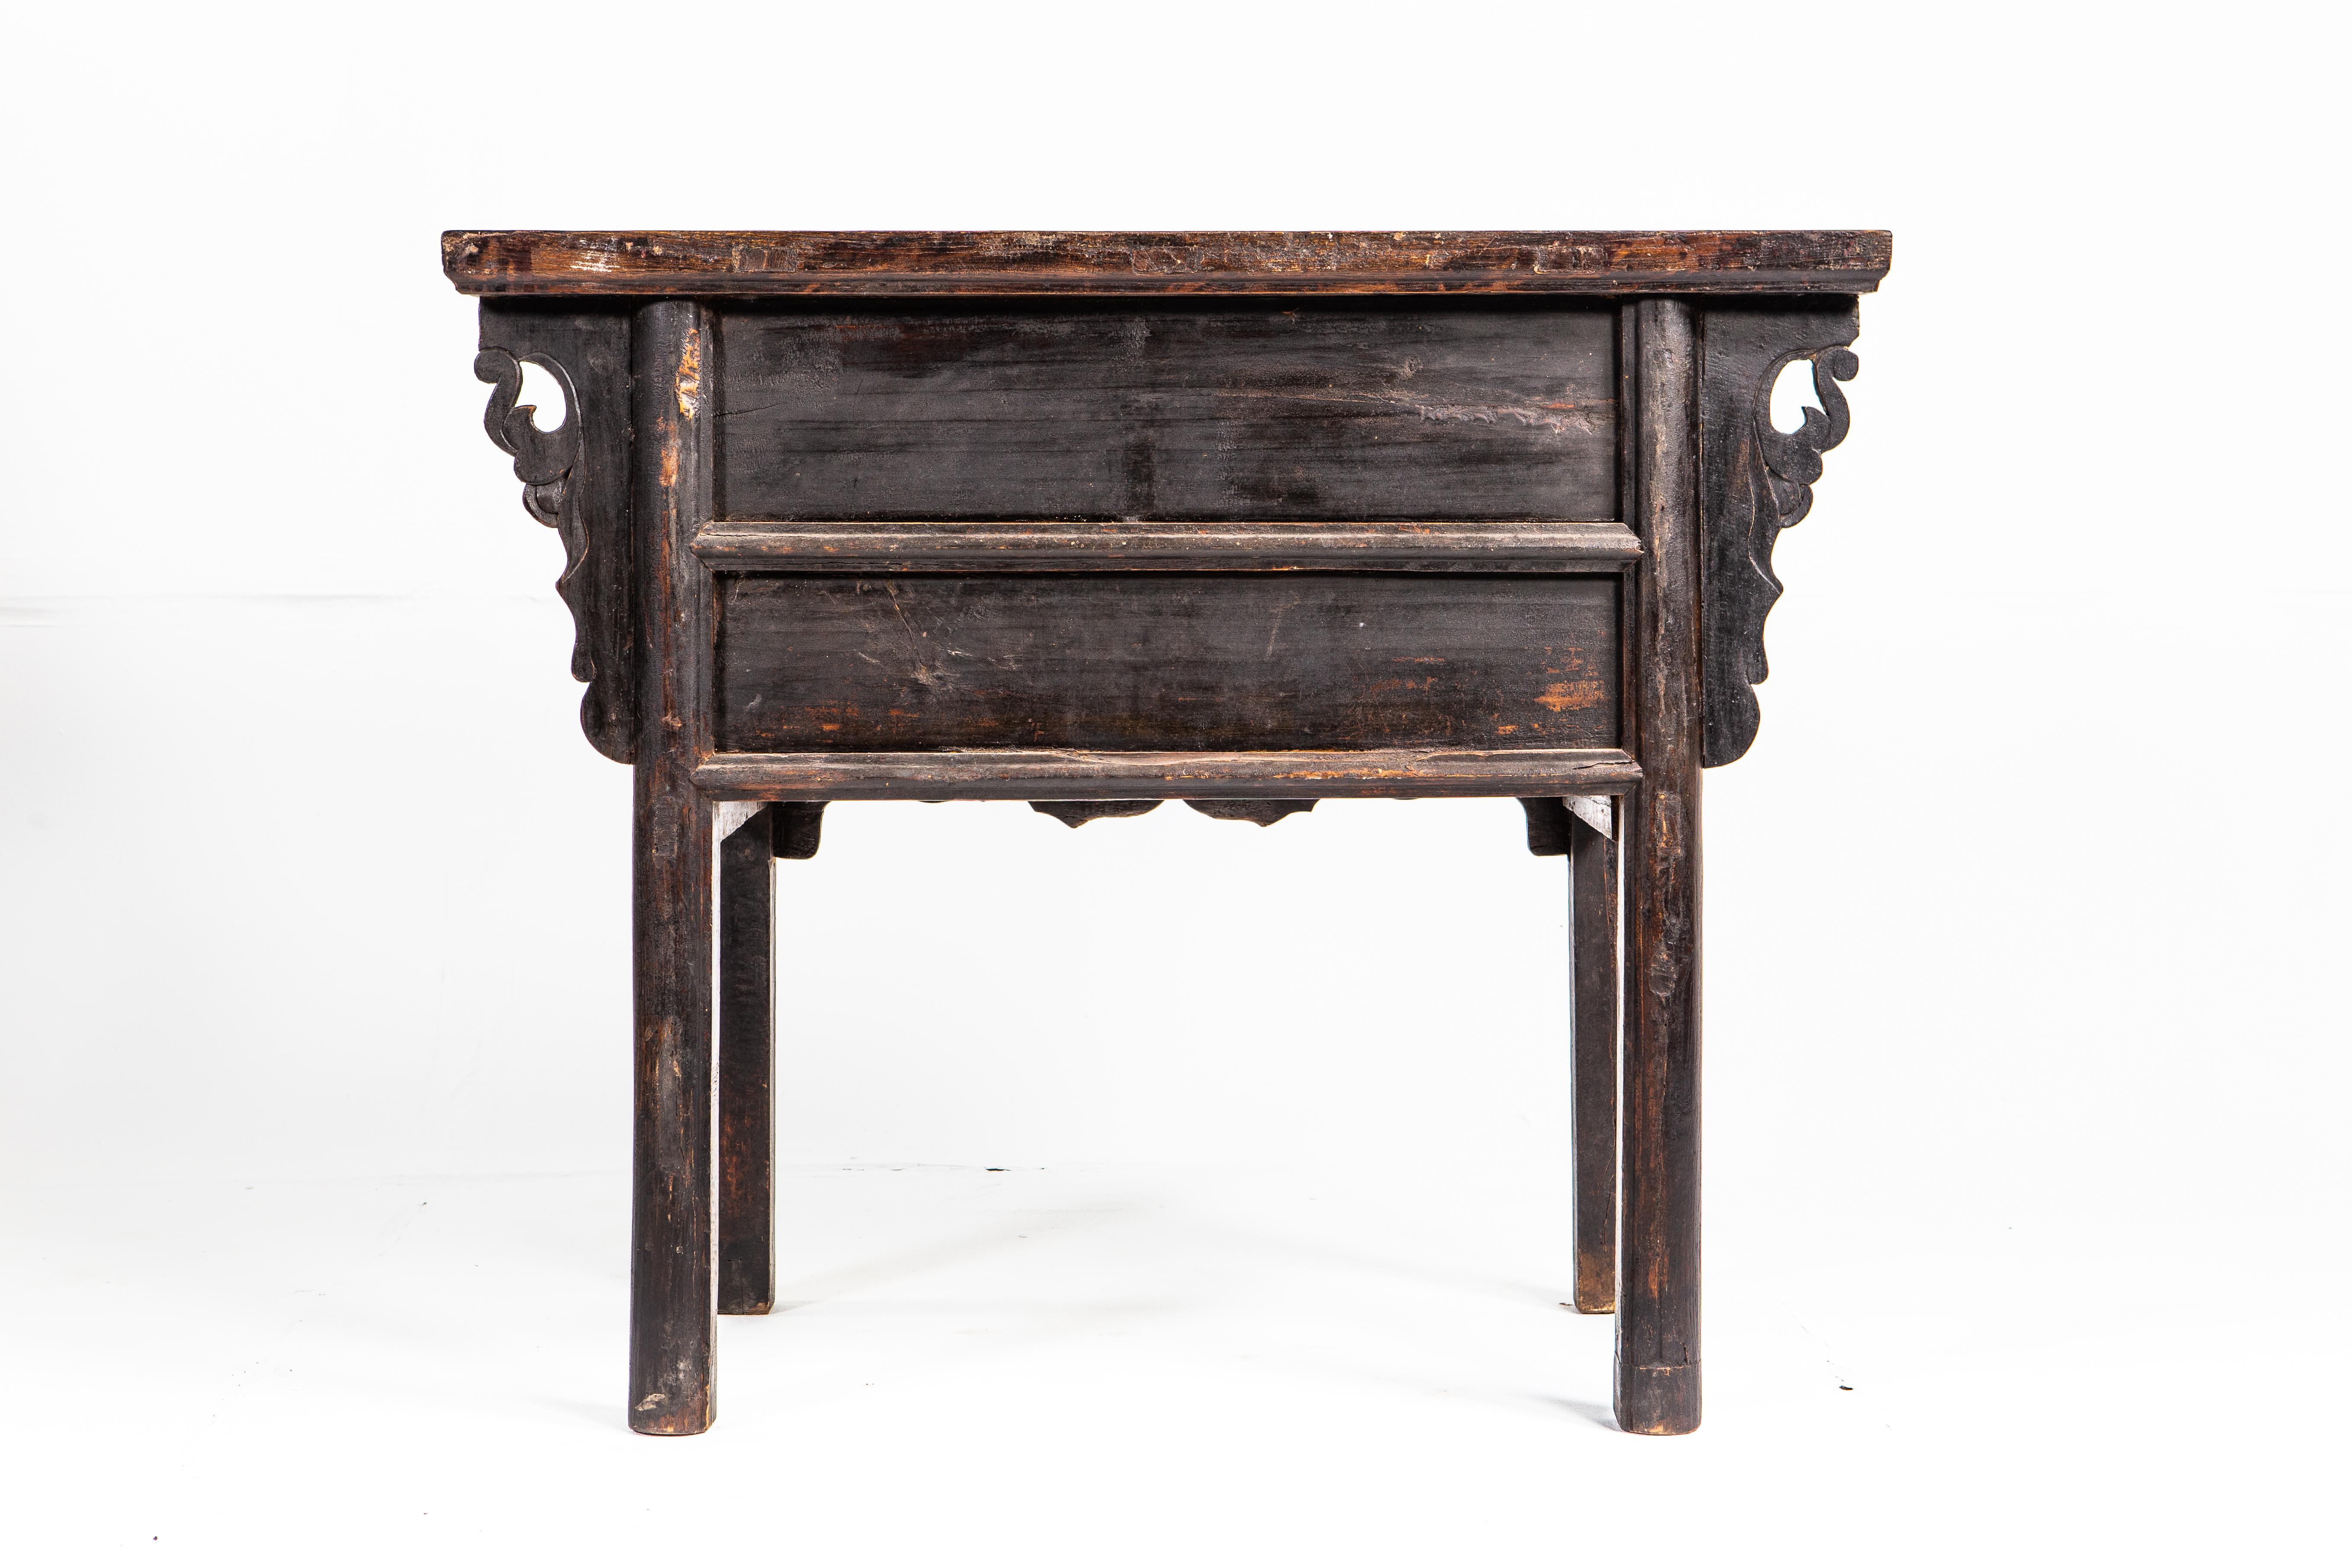 This handsome Chinese side chest is from Shanxi Province, China and made from elm wood. The piece features two drawers with intricately hard-carved drawer fronts depicting birds, deer, and foliage. The hidden storage compartment below is accessible